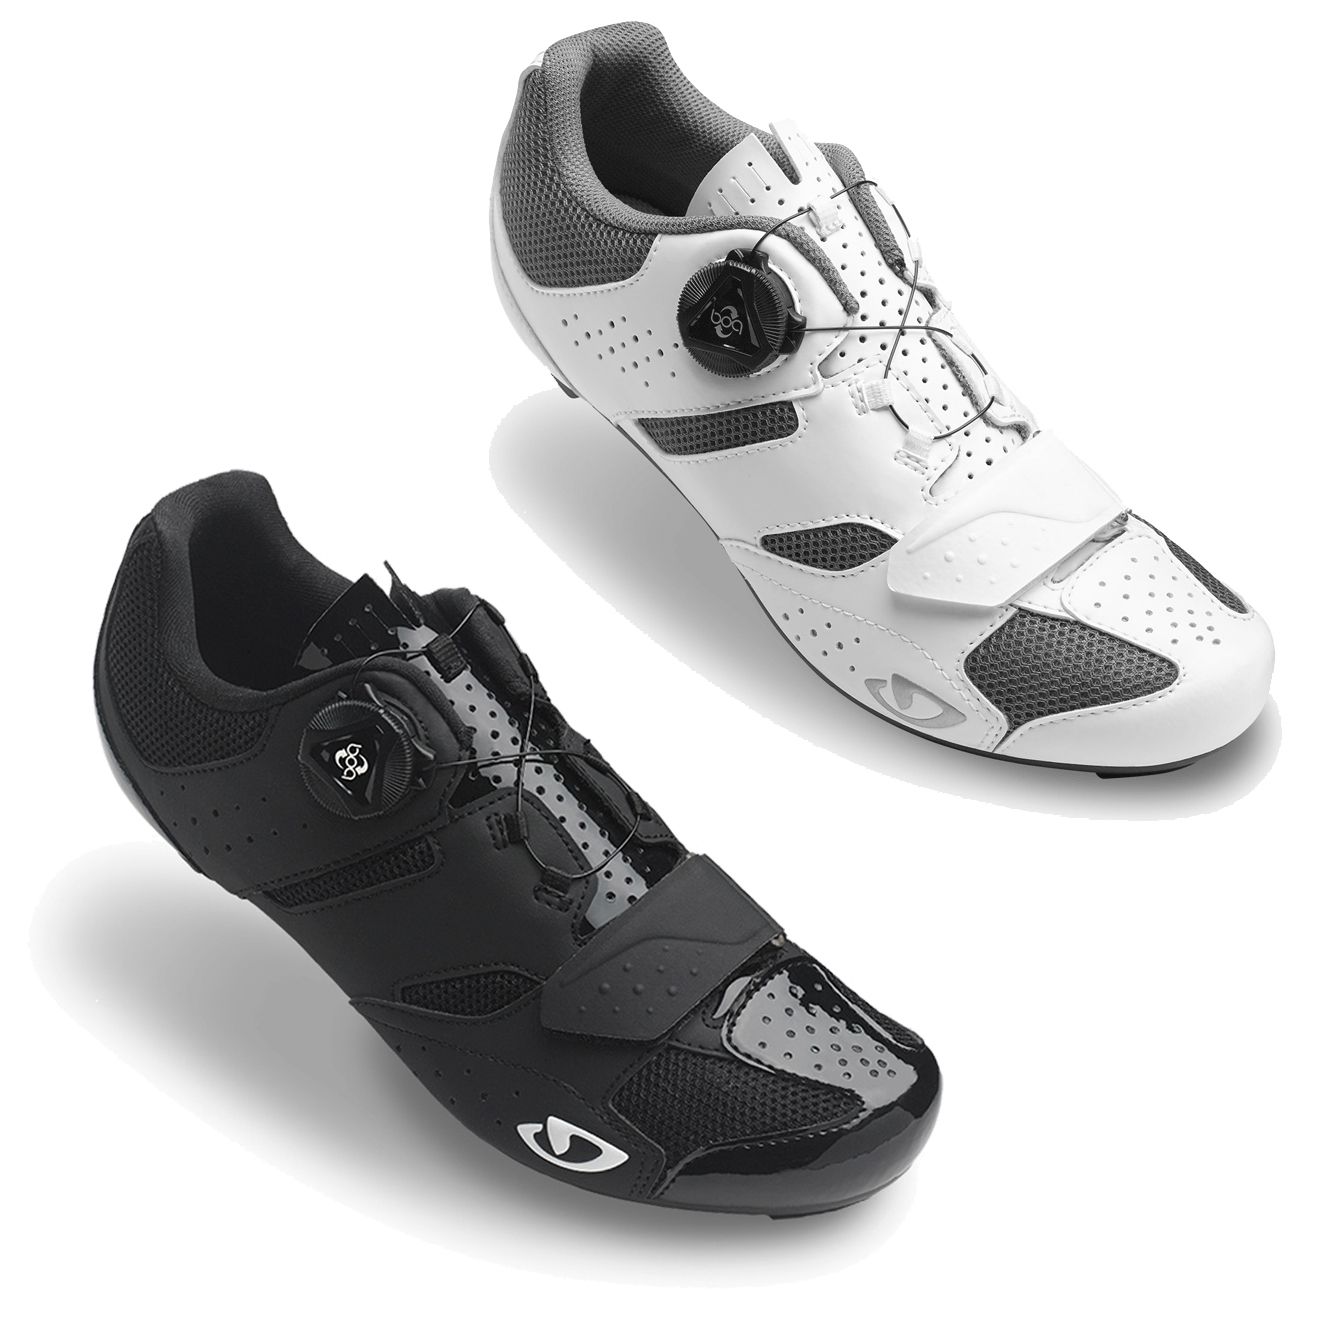 womens road cycling shoes size 39